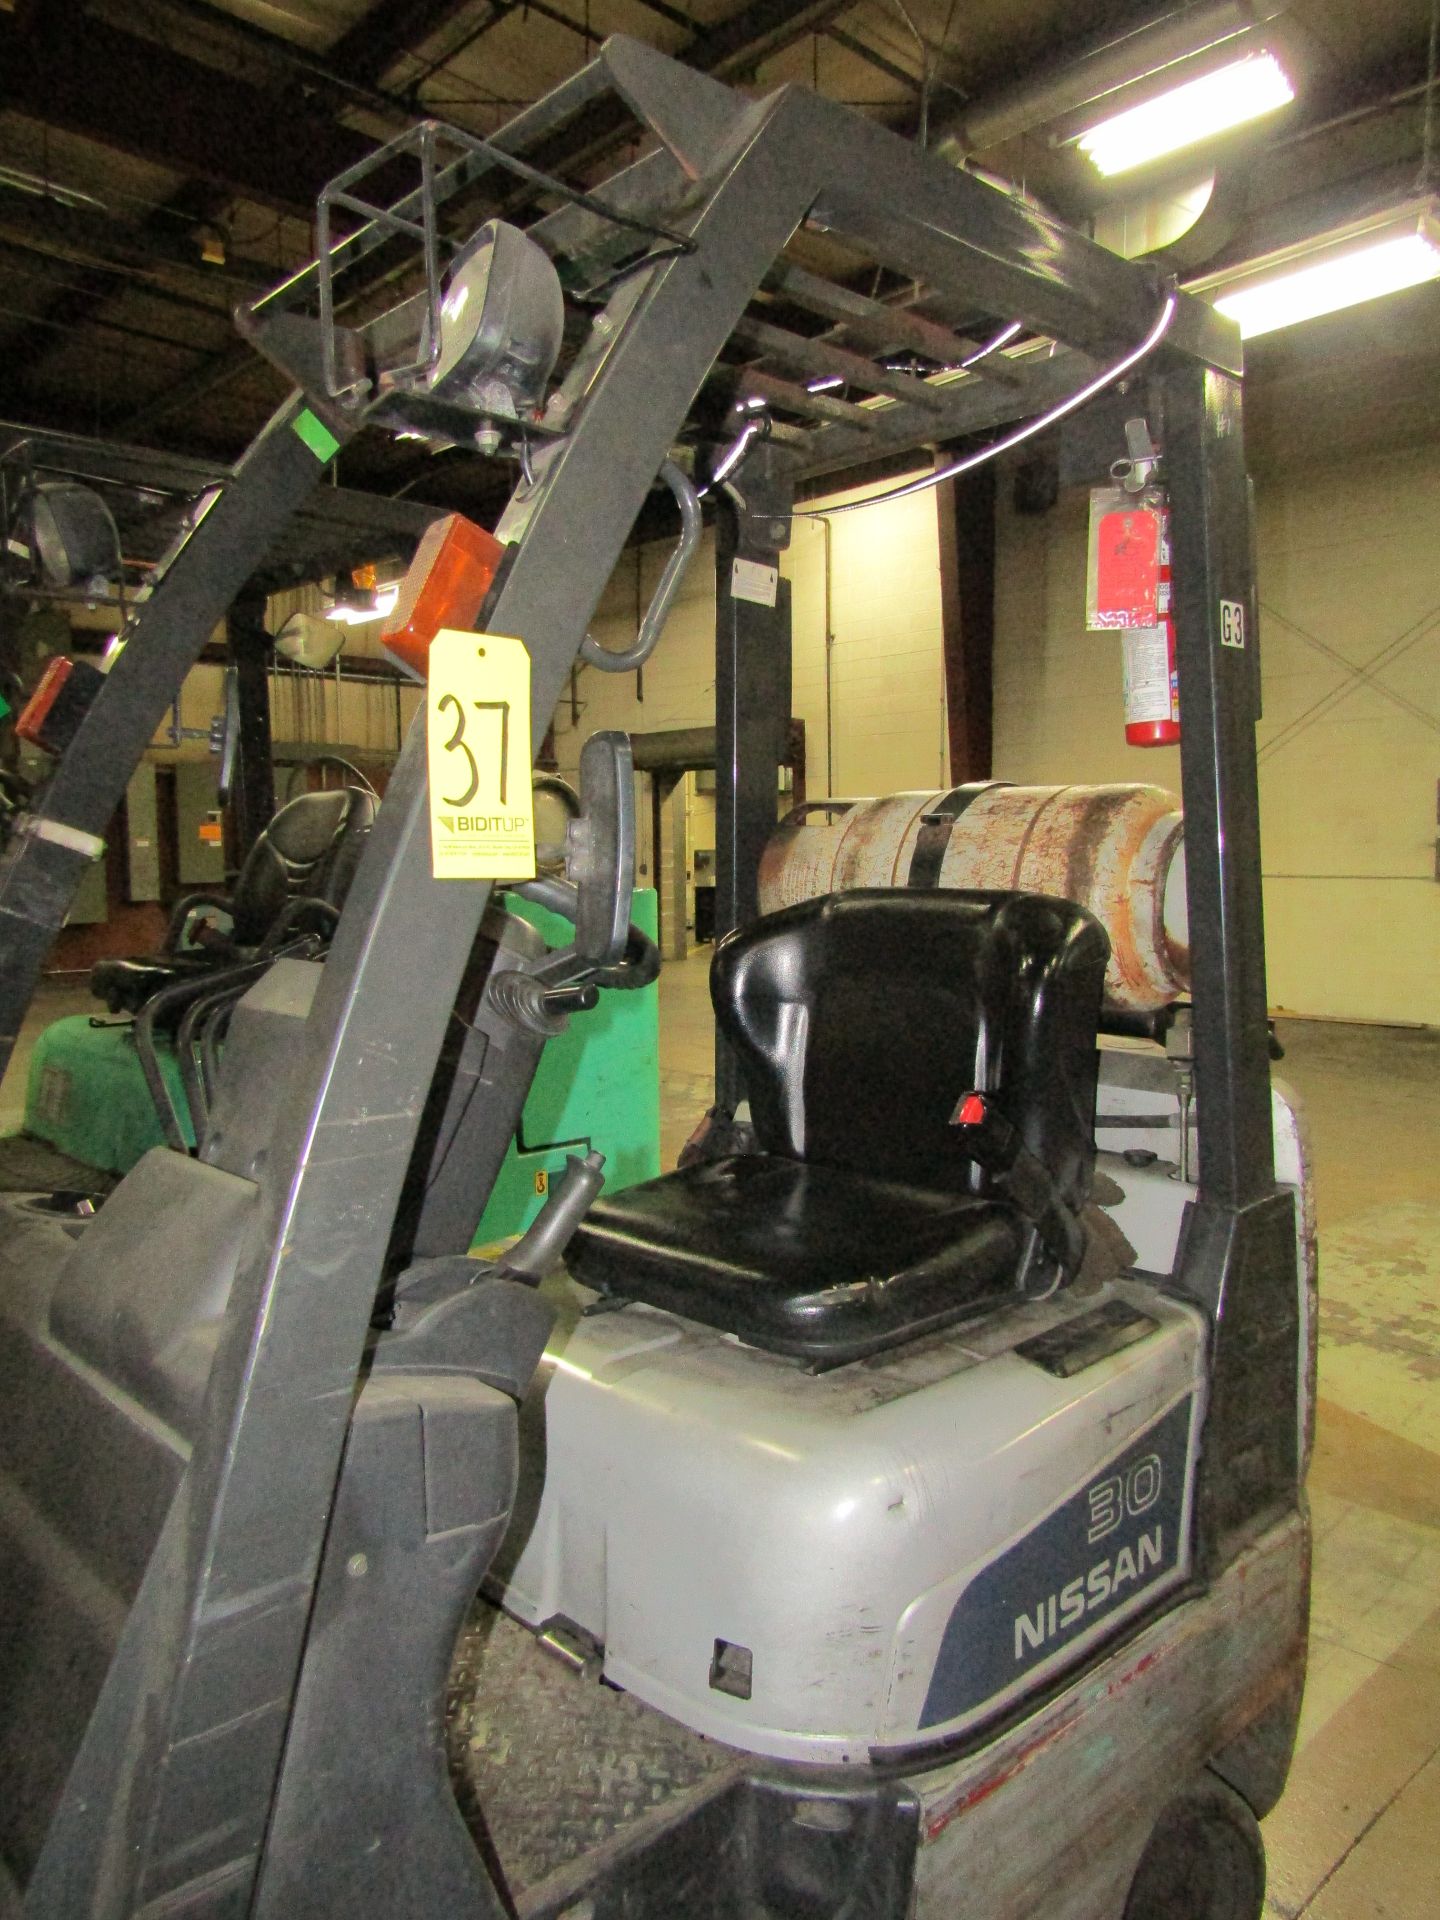 Nissan Forklift, M#: MCPL01A15LV, S#: CPL01-9NO234, Lp, 3 Stage, Side-Shift - Image 2 of 5